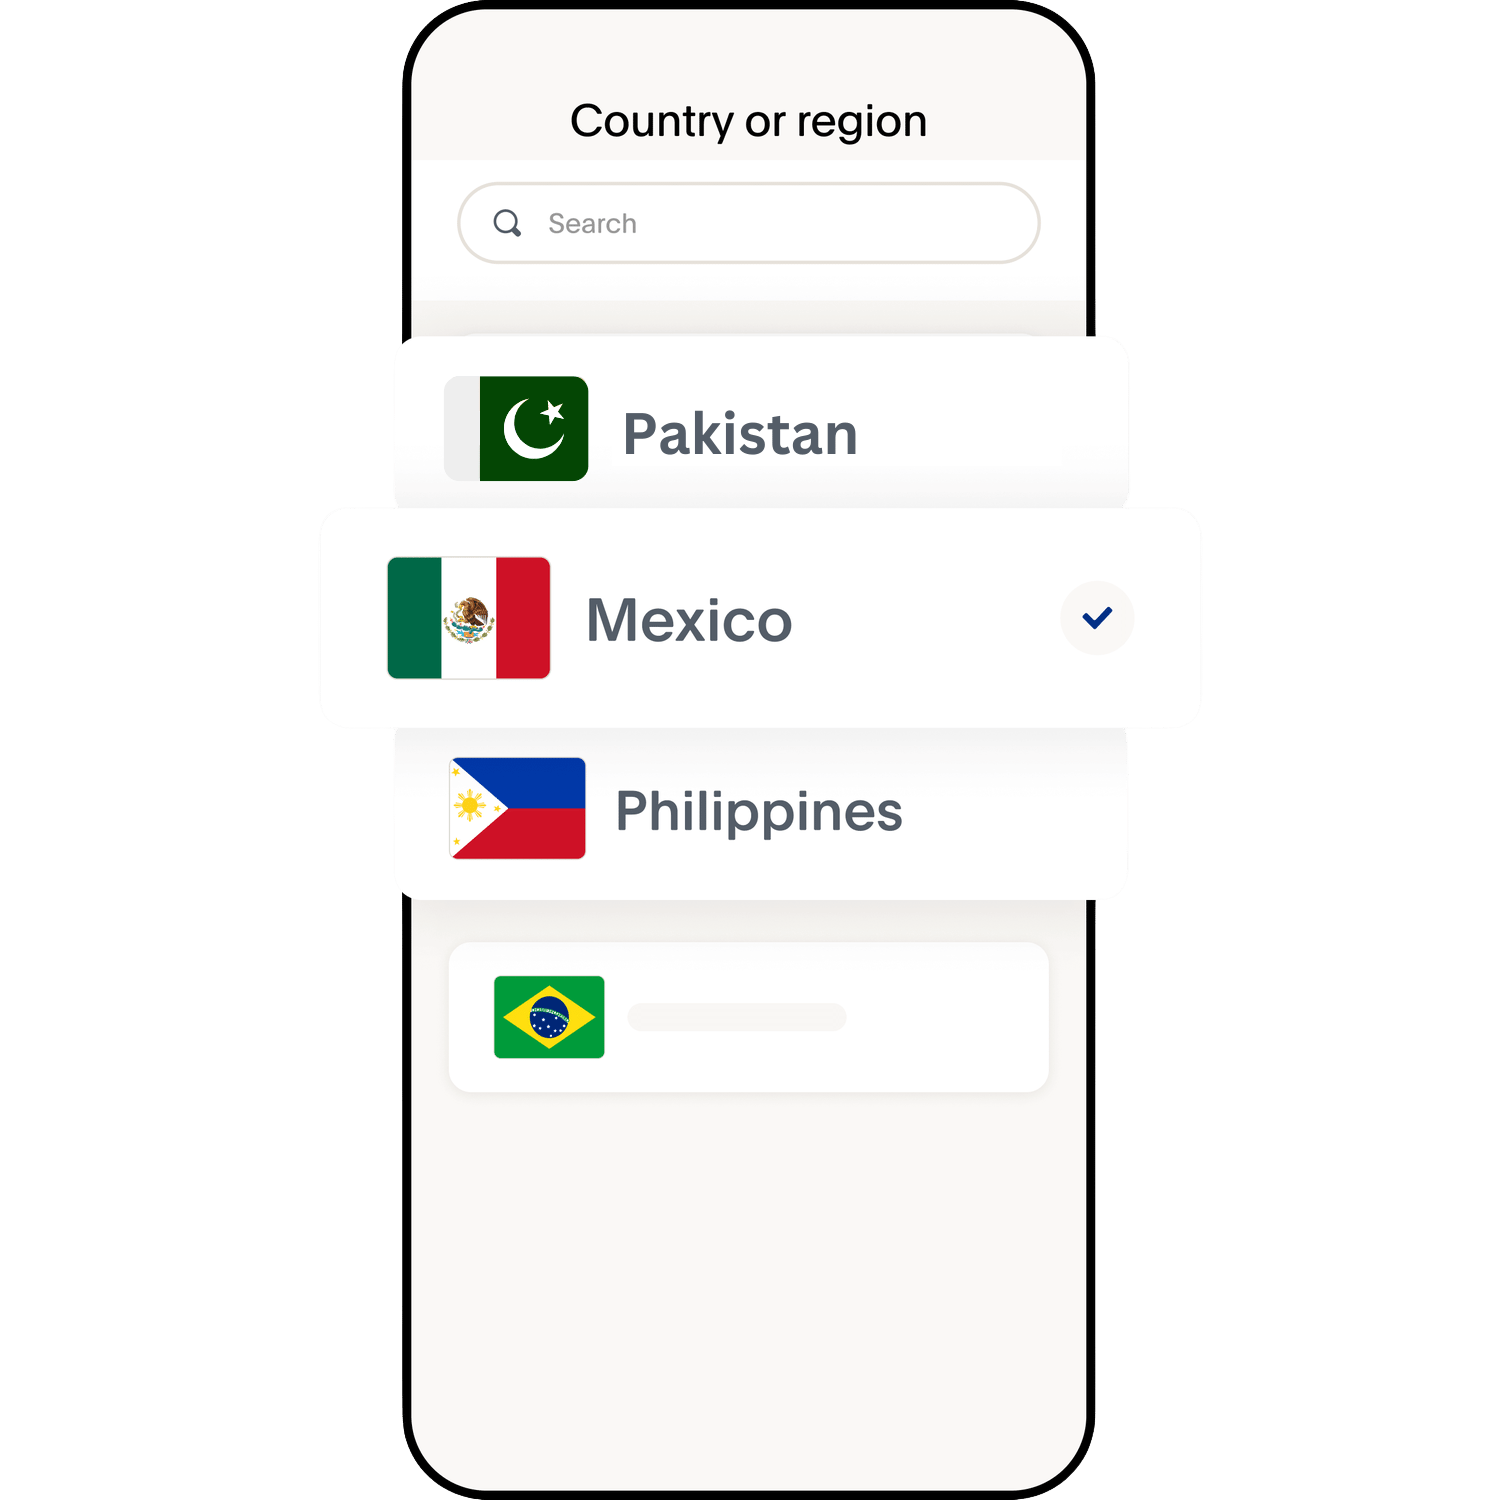 A picture of mobile shwoing country flags where payement gateways are available